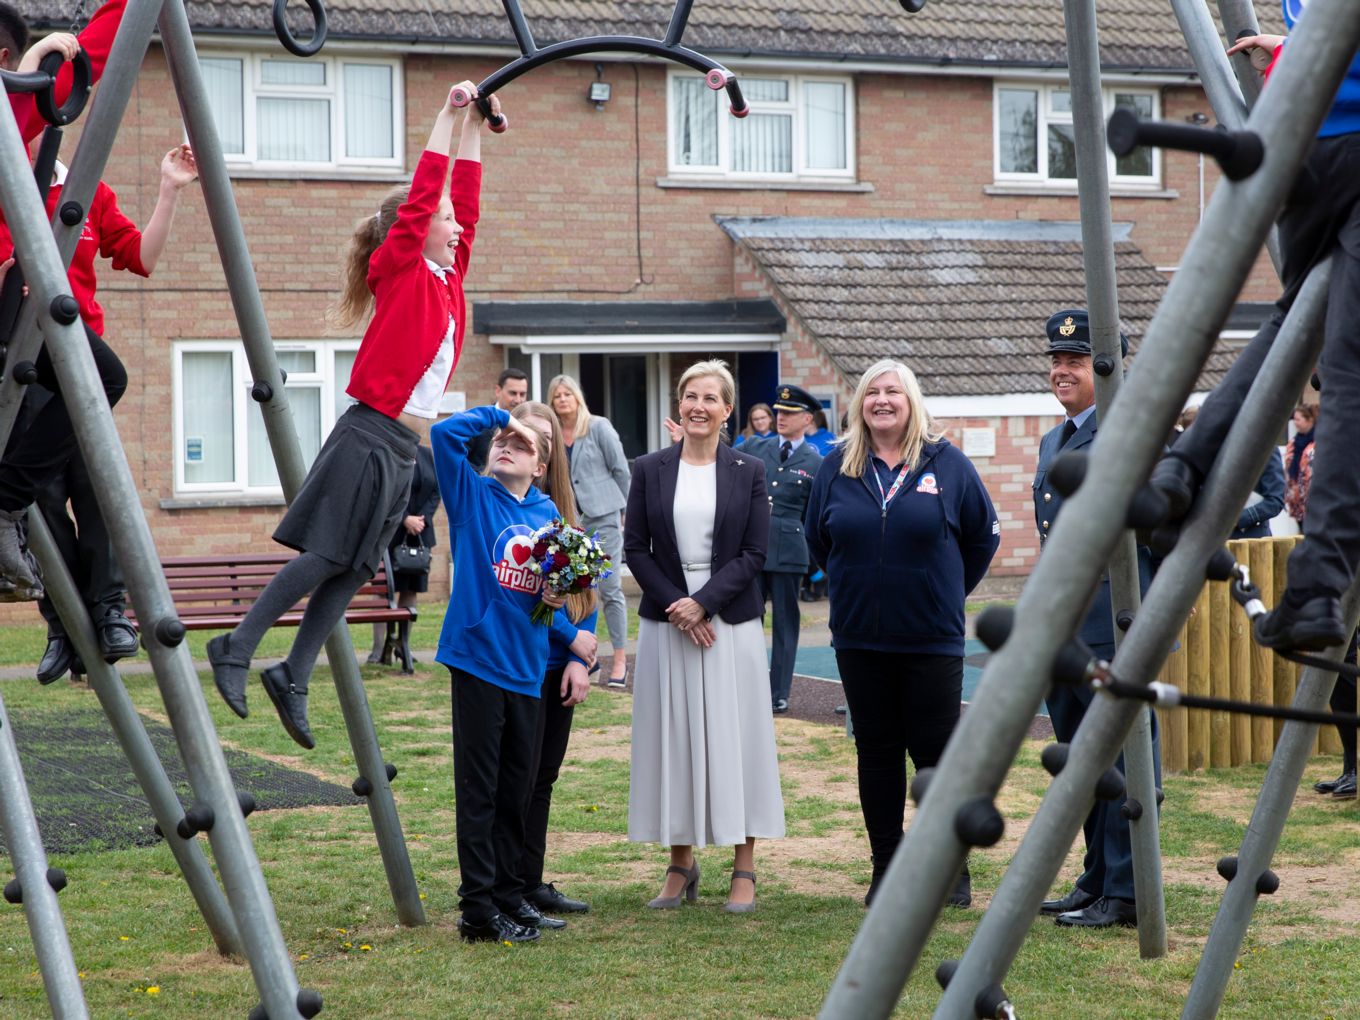 One of the children from Wittering Primary School tests out the new monkey bars